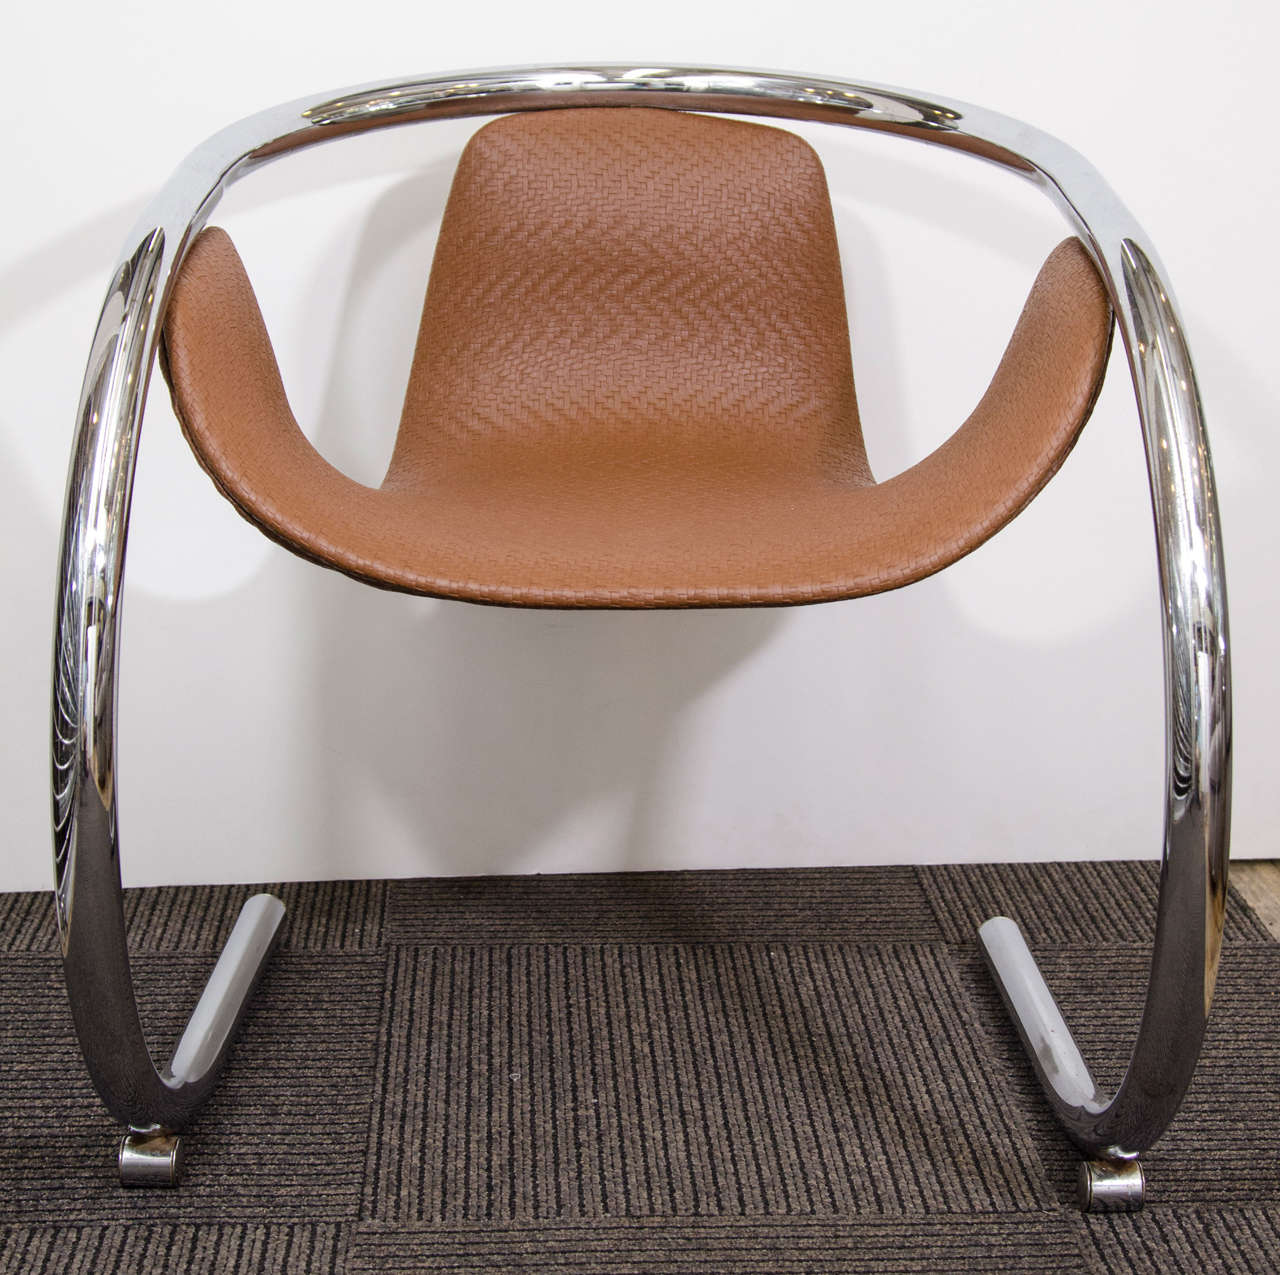 Vintage pair of California modern chrome and vinyl chairs by Bryon Botker for Landes Manufacturer.  Good condition with age appropriate wear; some scratches to seats.